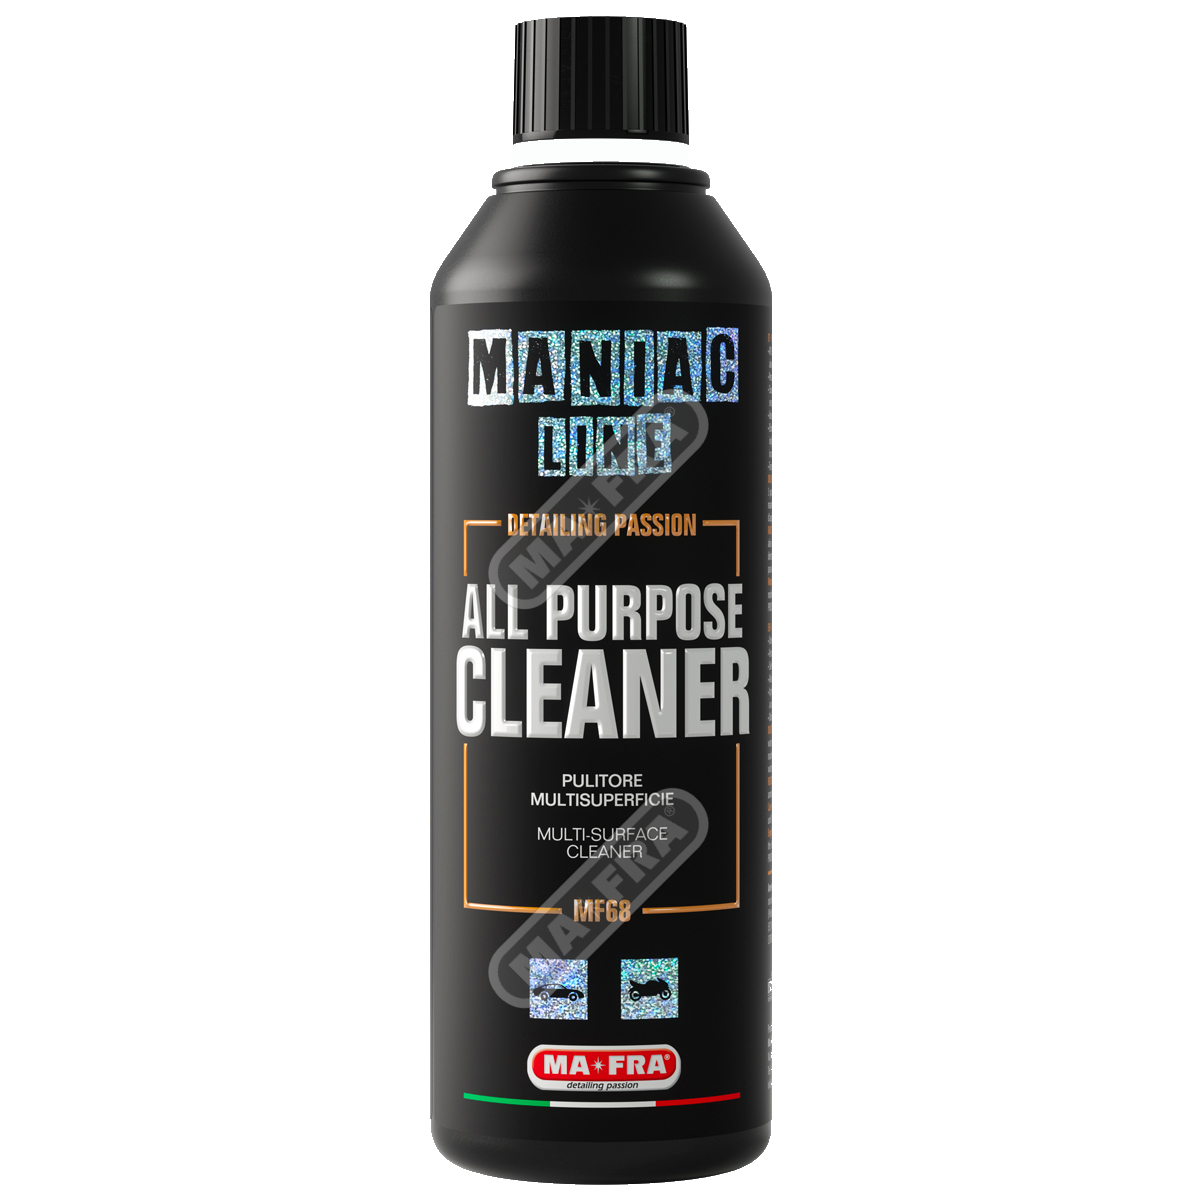 ALL PURPOSE CLEANER